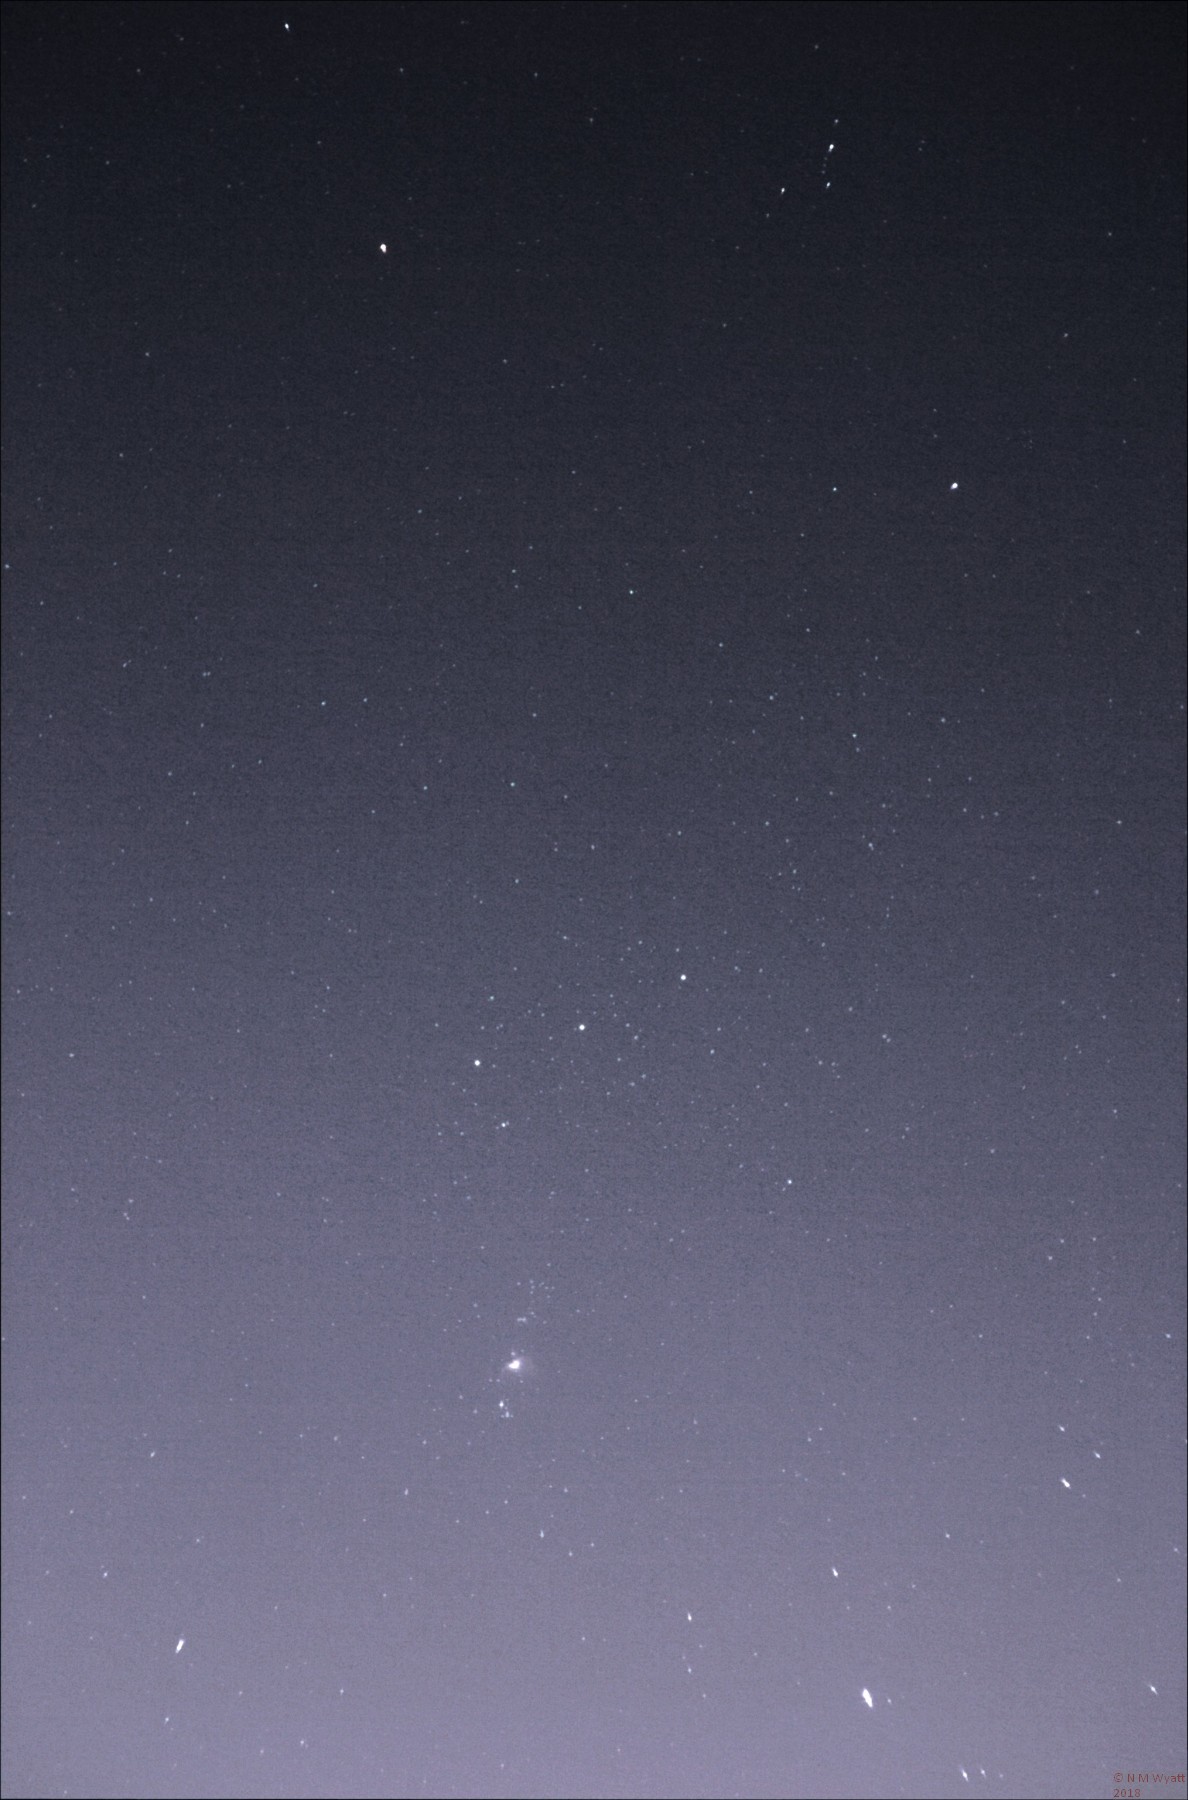 A short exposure image of Orion